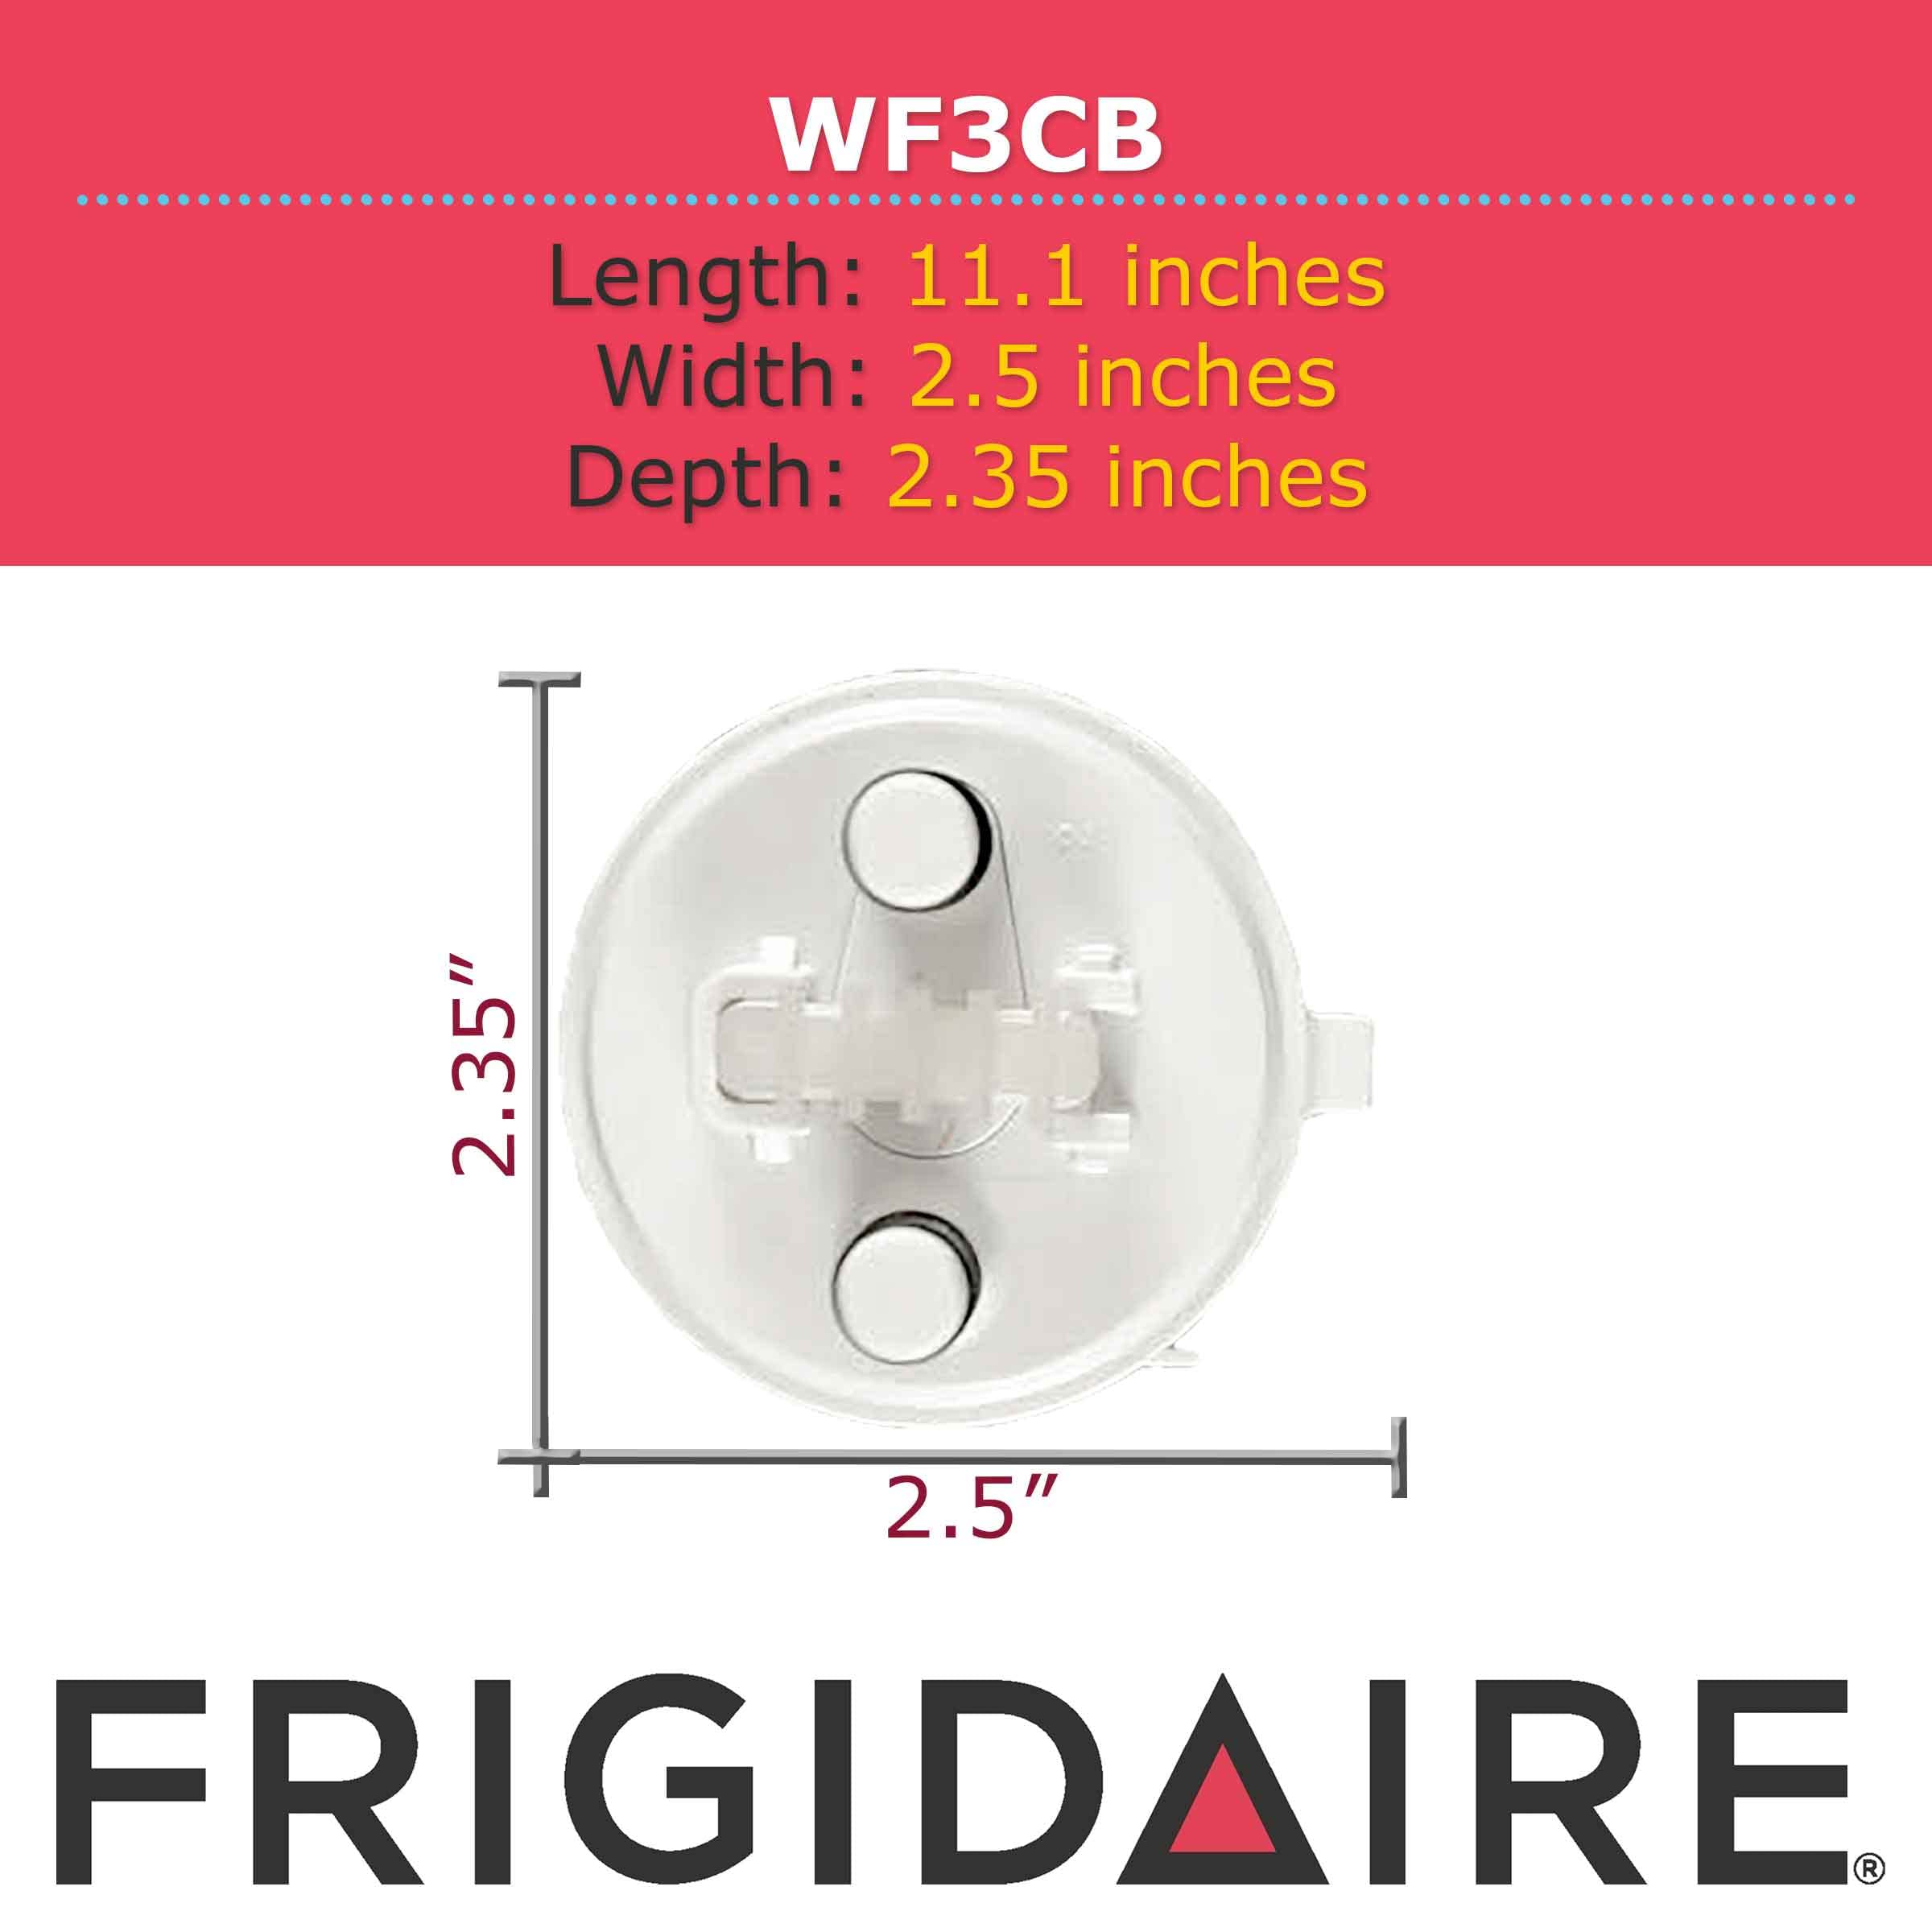 Frigidaire WF3CB Puresource3 Refrigerator Water Filter , White, 1 Count (Pack of 1)